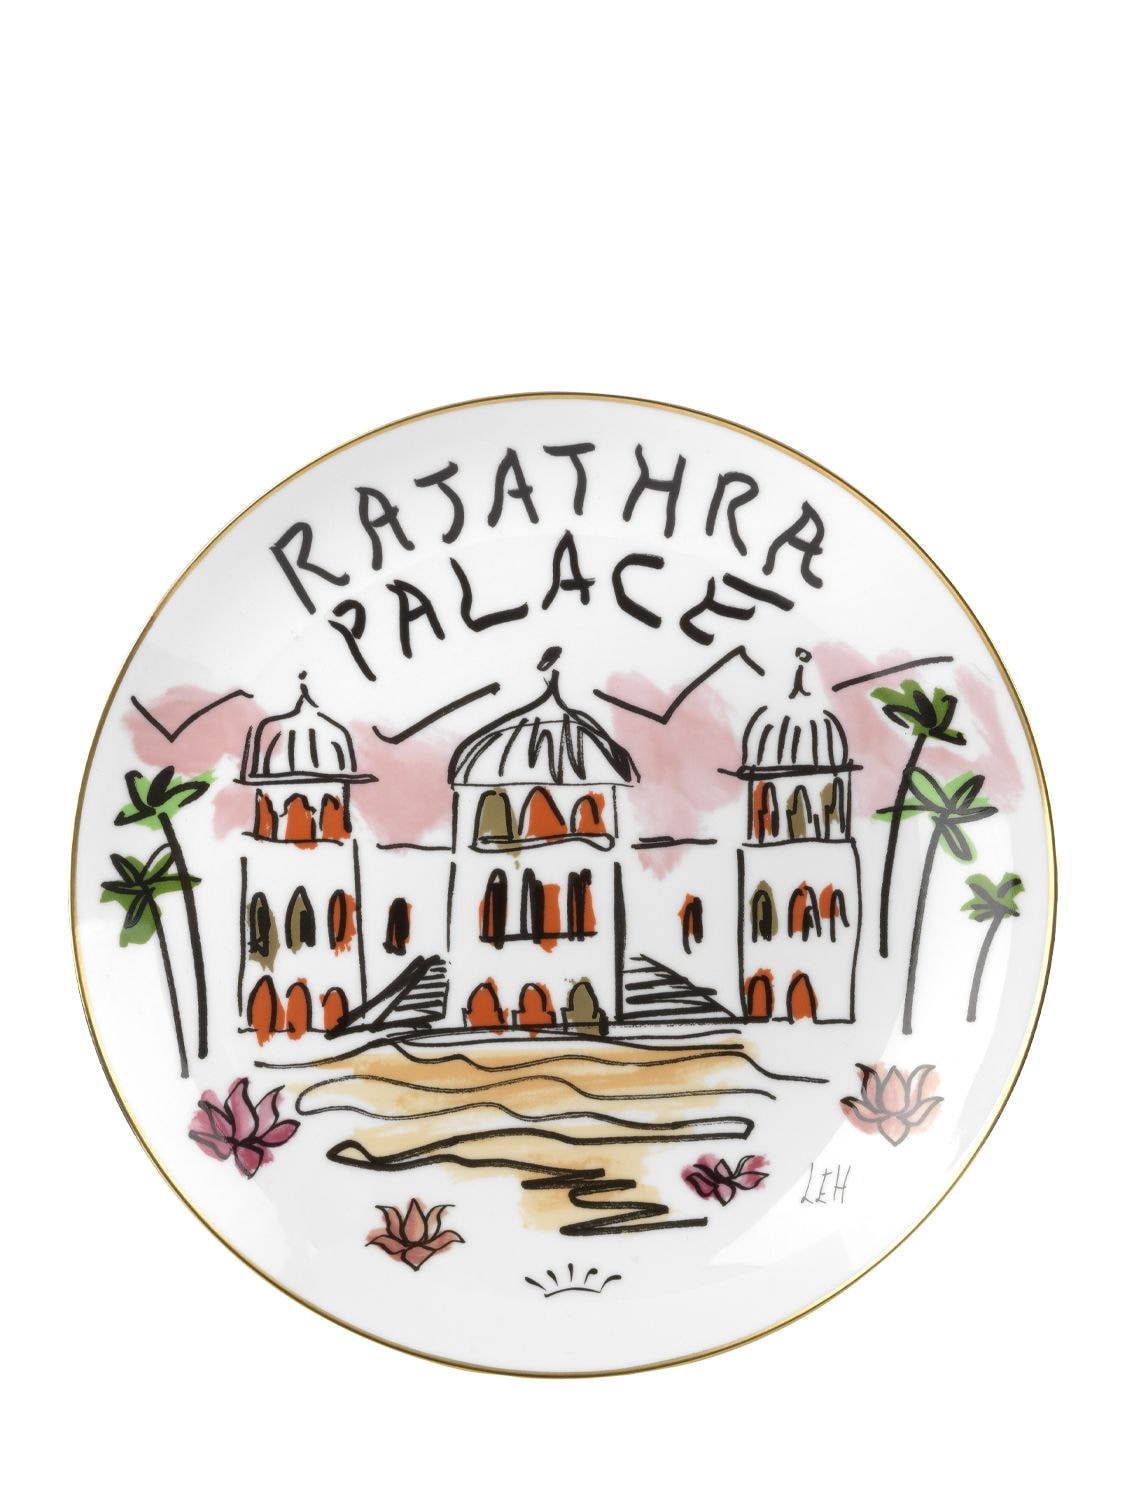 Image of Rajathra Palace Plate